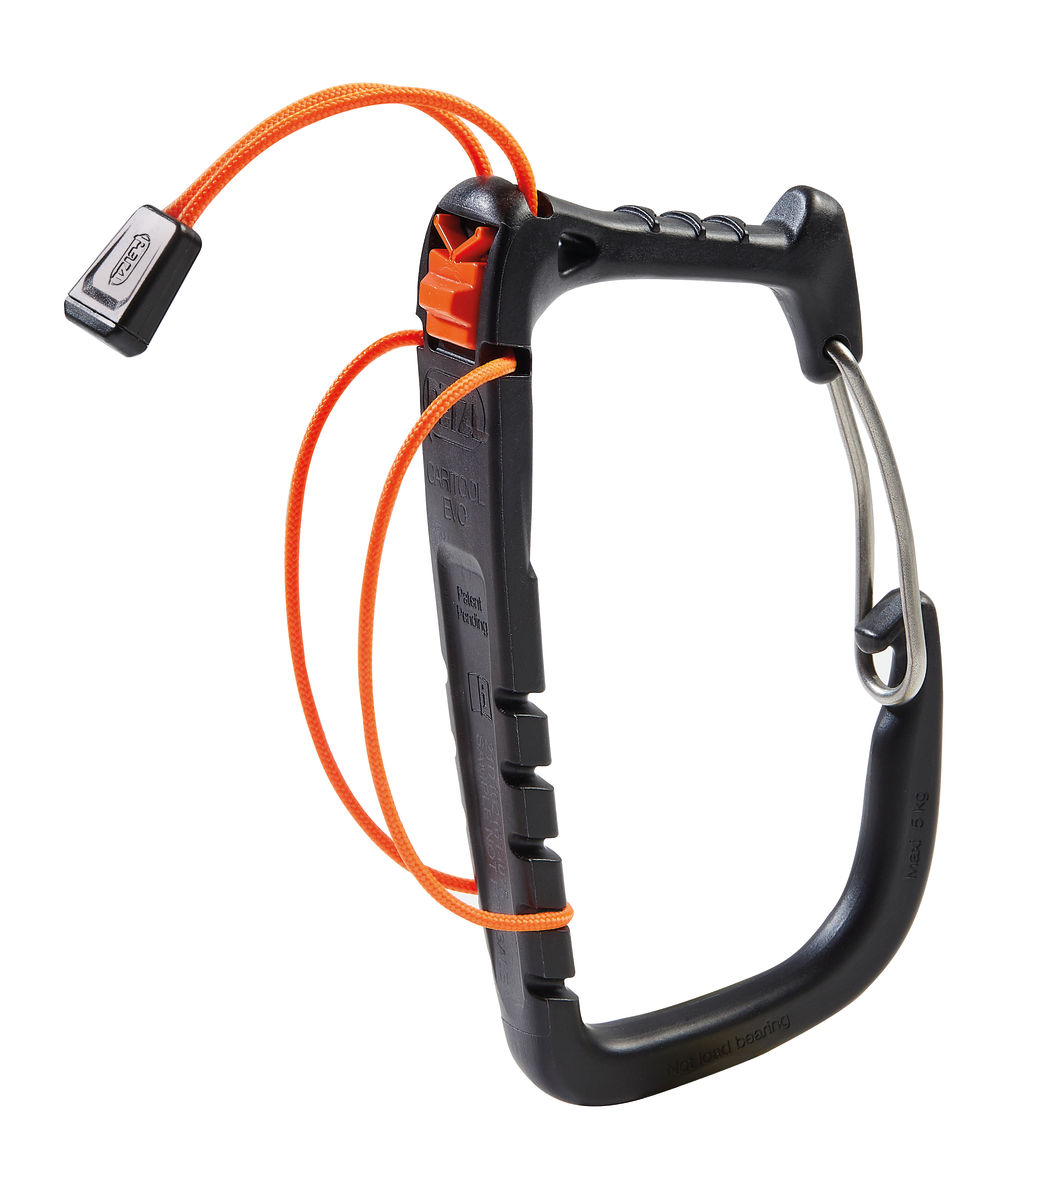 NEW 2019 VERSION Details about   PETZL CARITOOL 